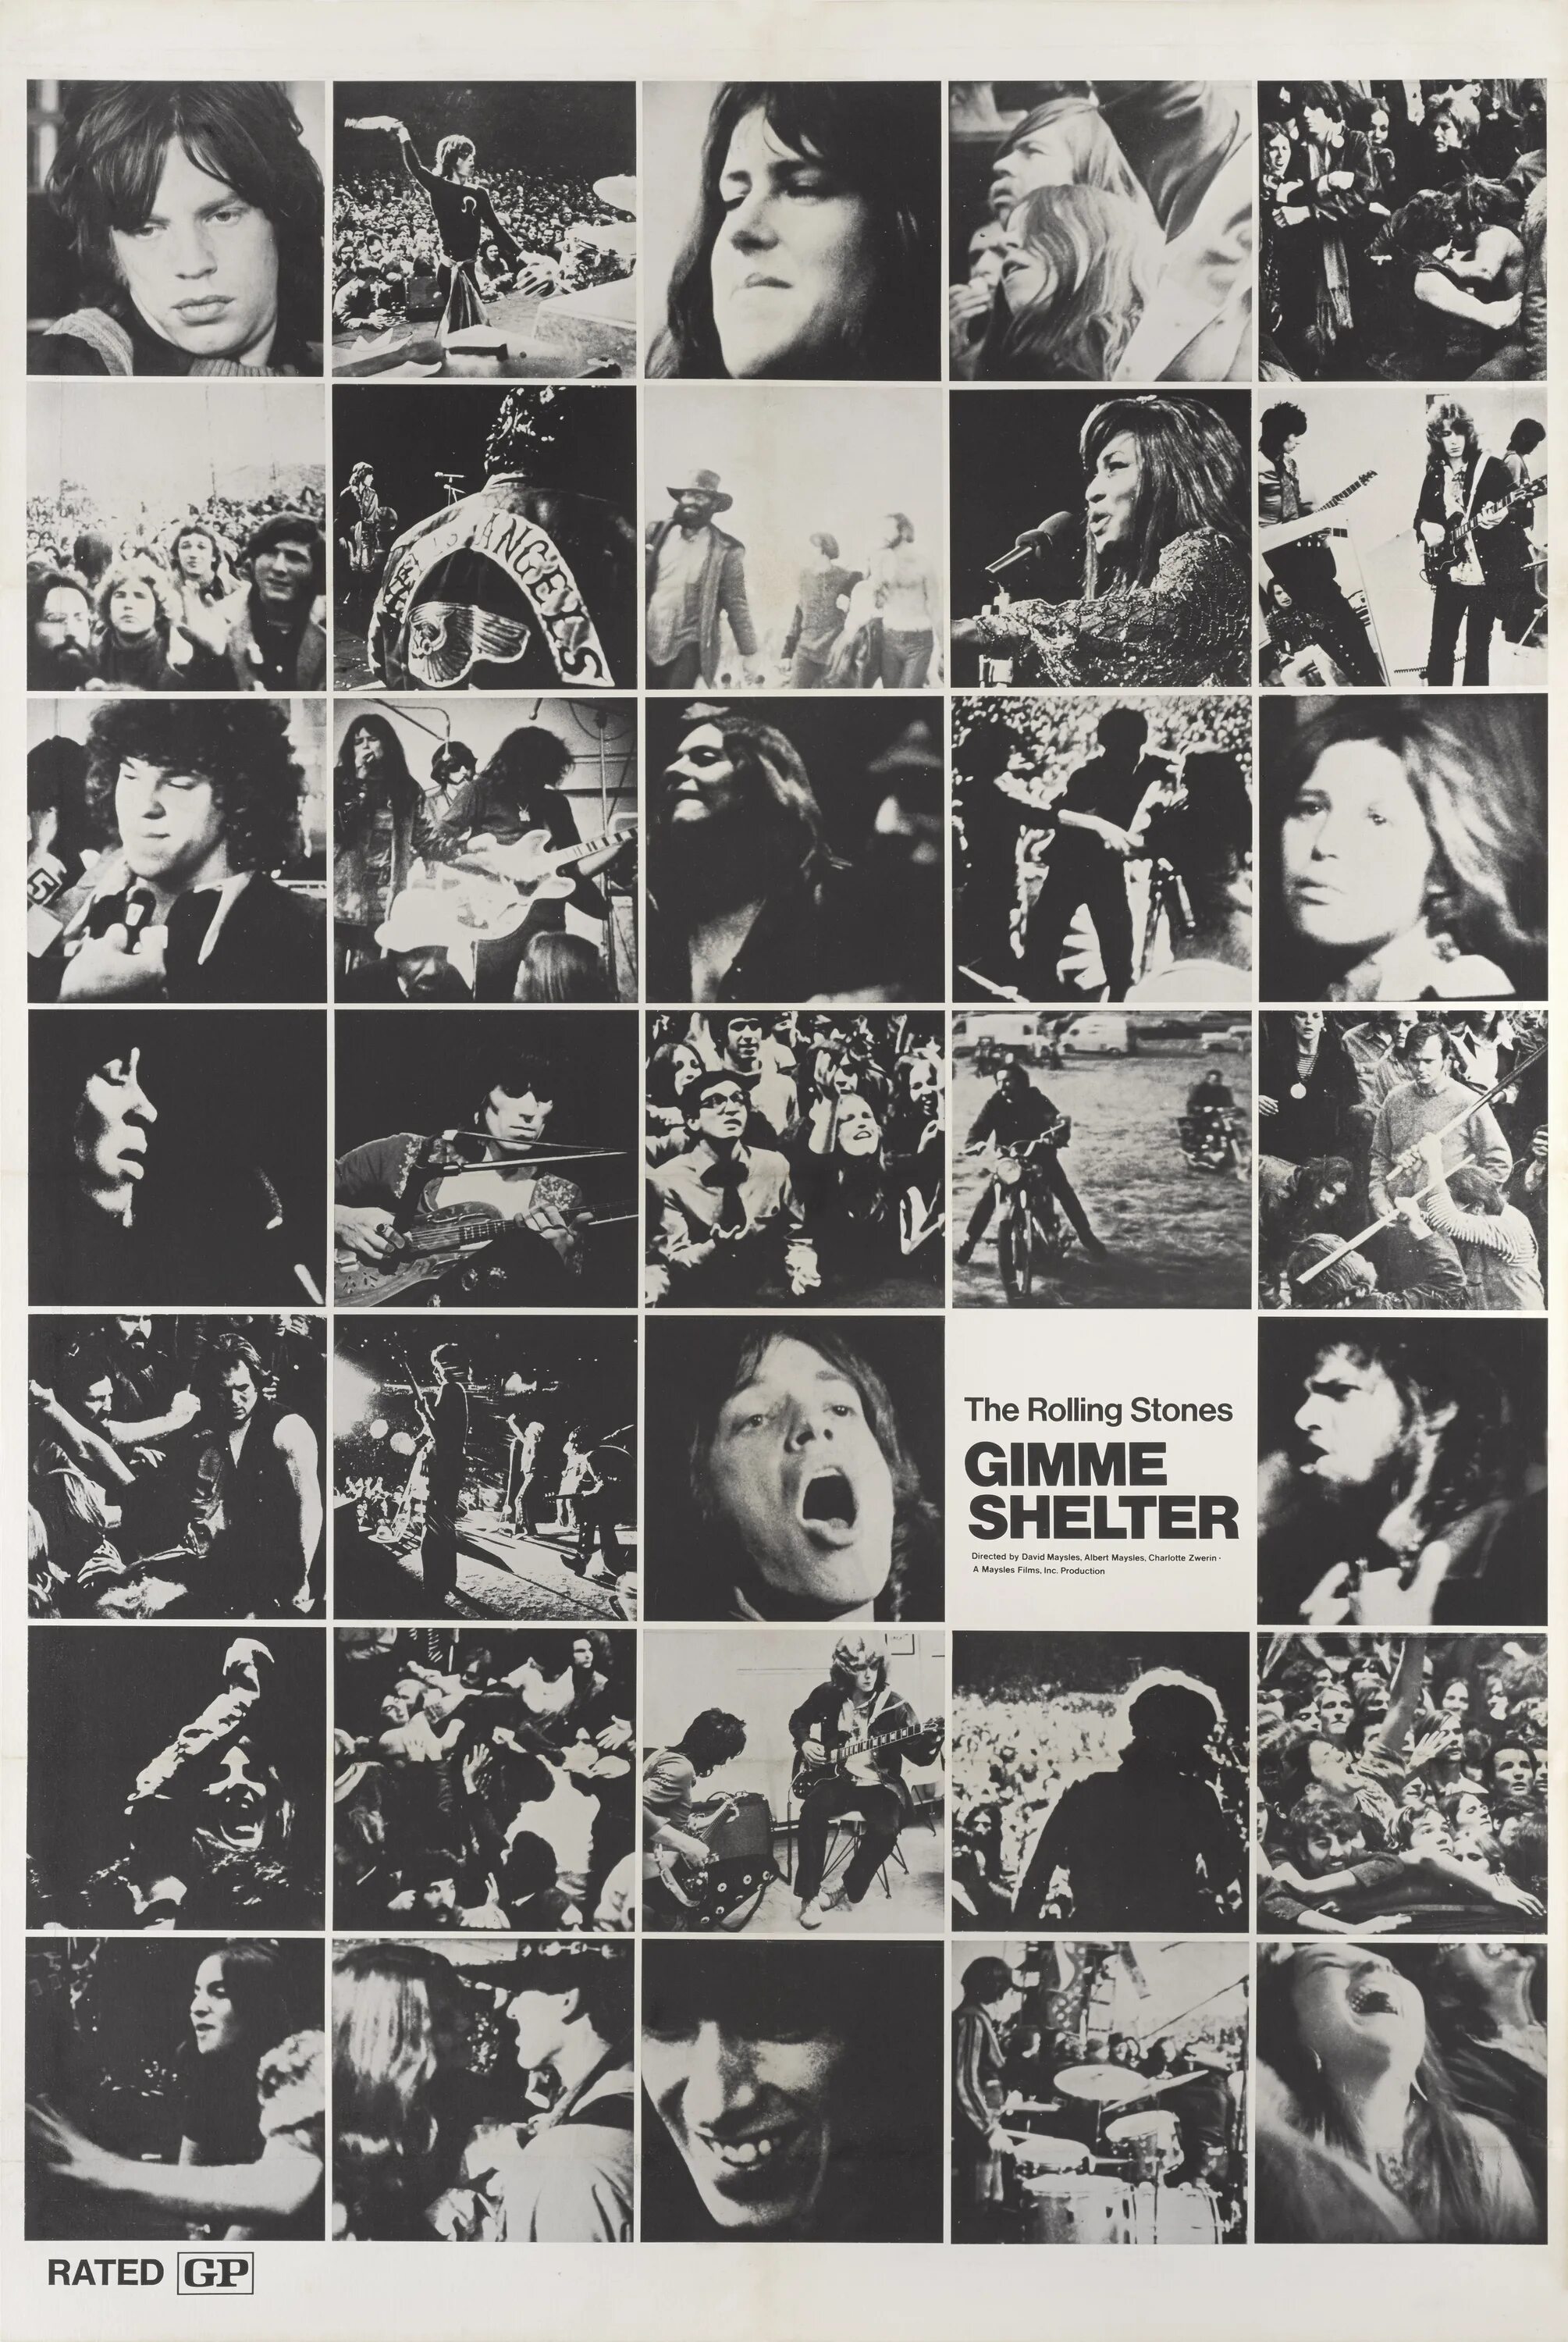 Stones gimme shelter. Rolling Stones posters. Rolling Stones "Gimme Shelter". The Rolling Stones Gimme Shelter 1970.